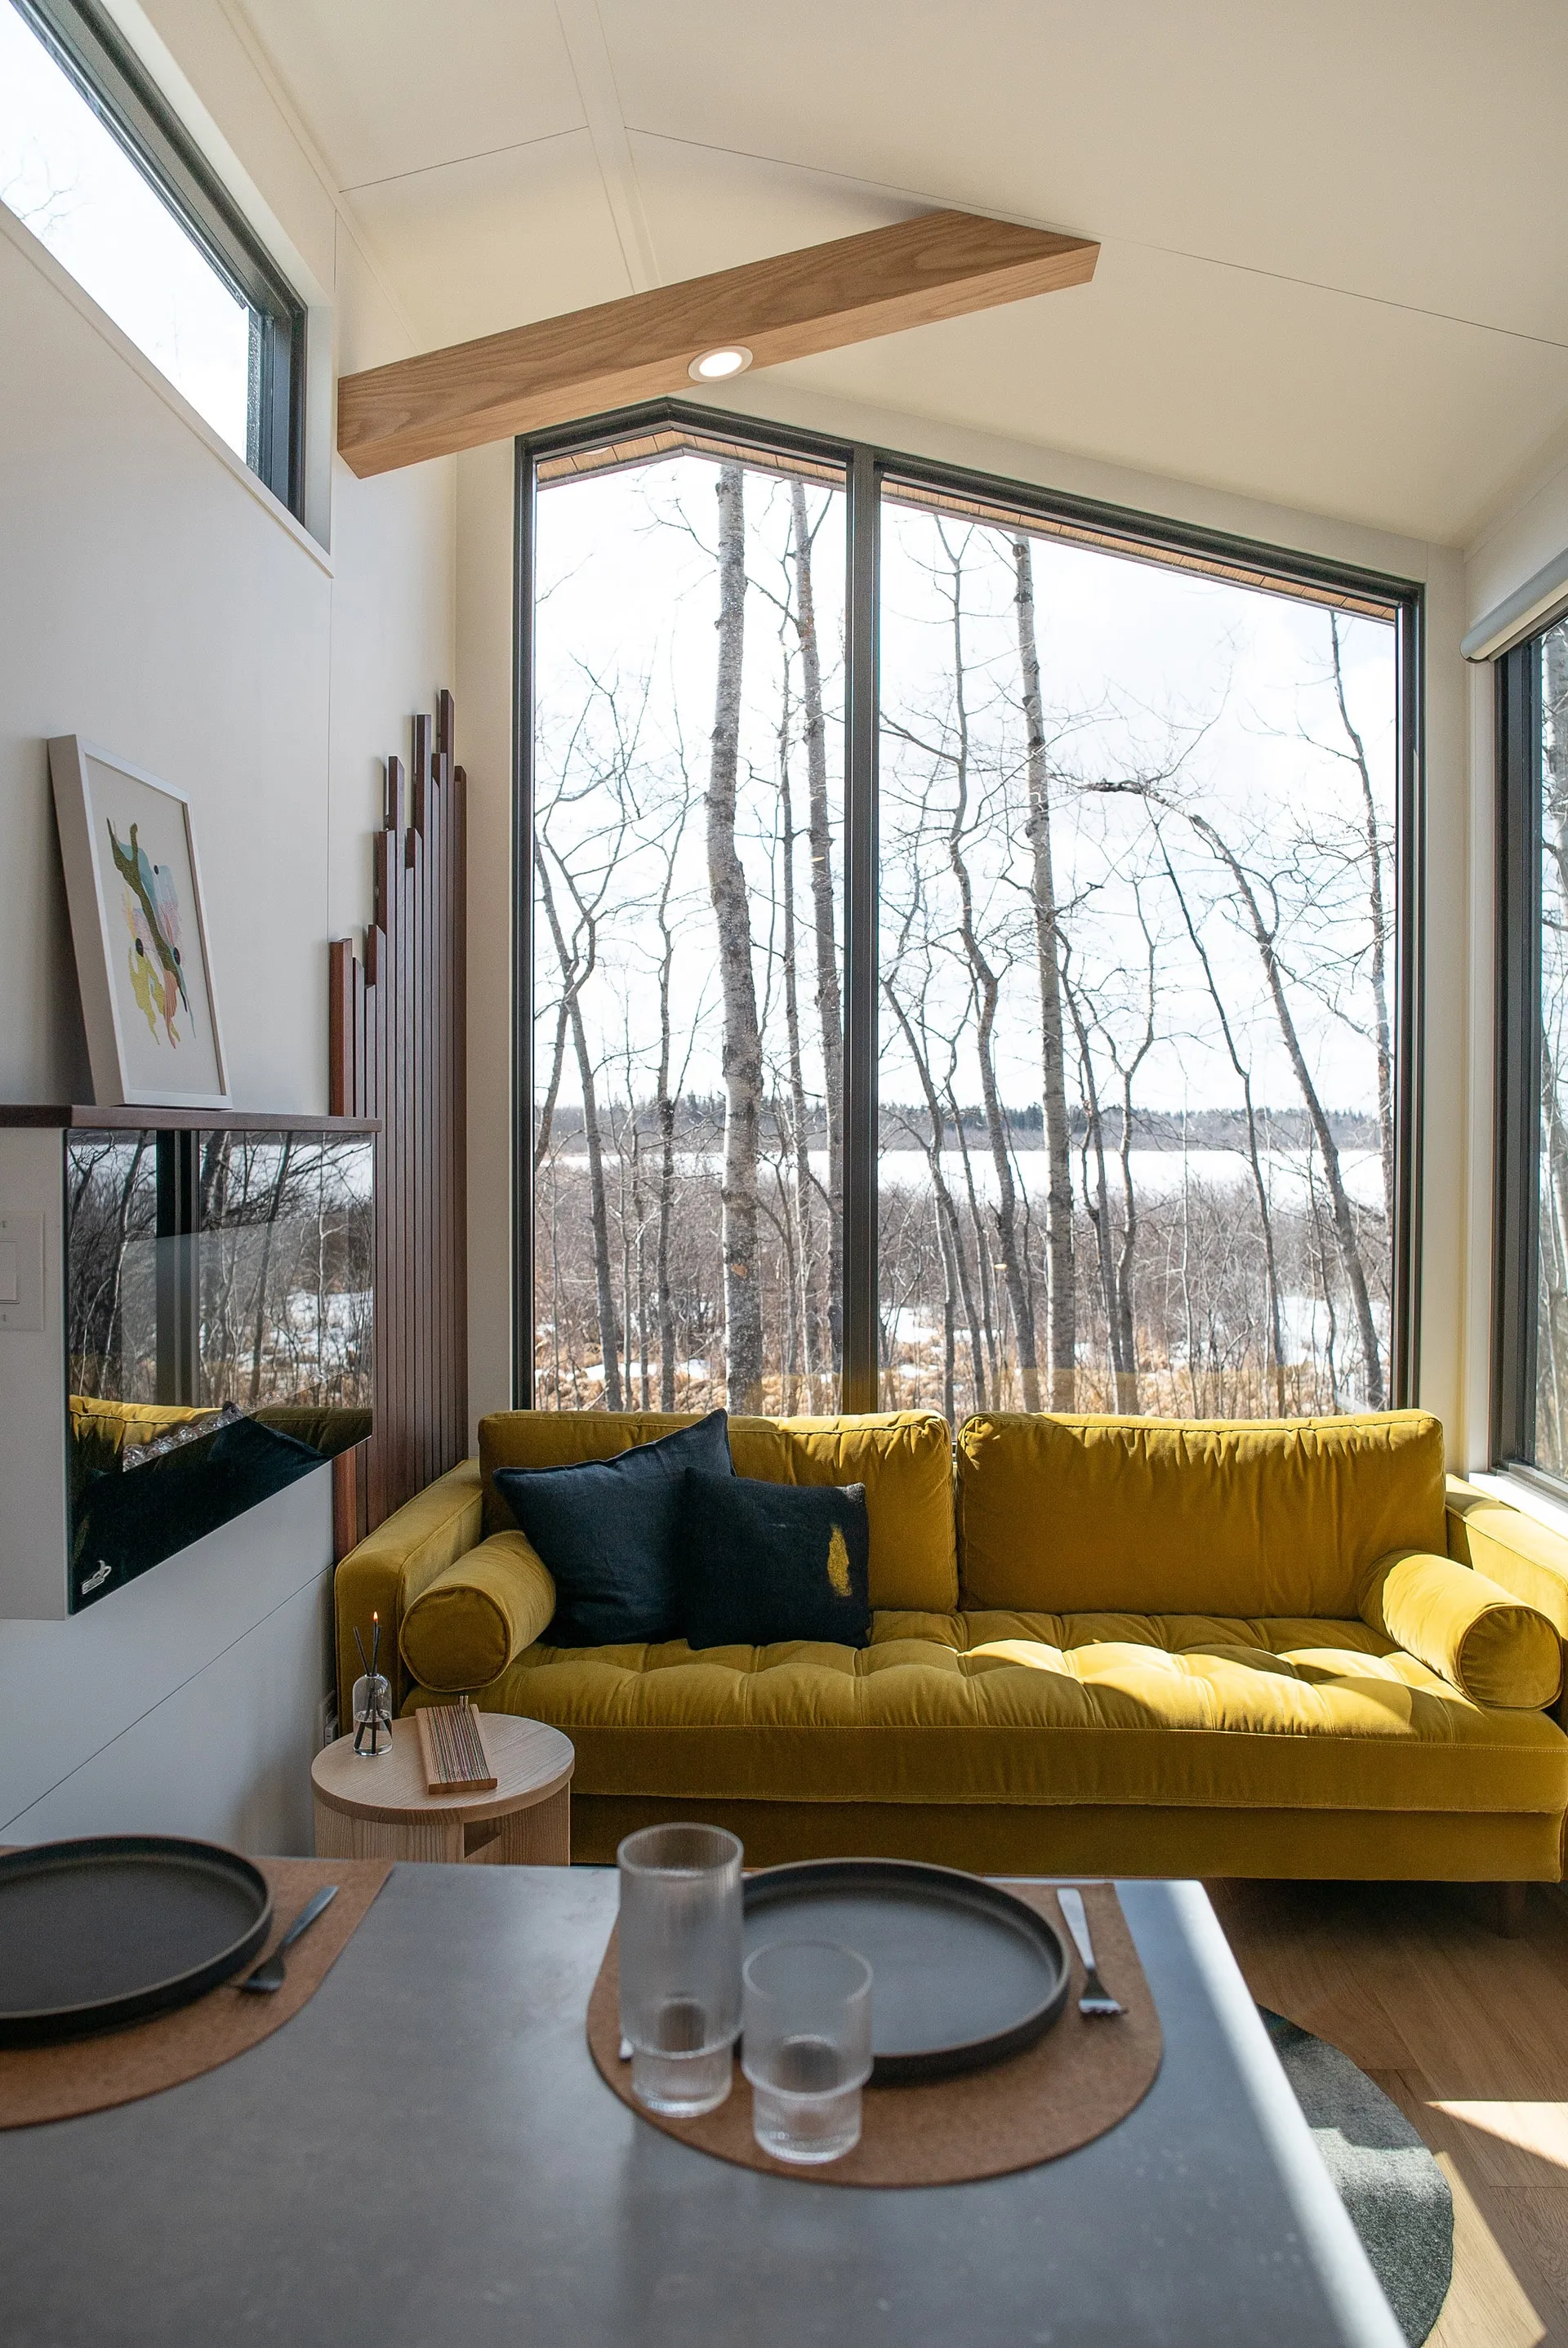 Kitchen counter view of Aqua tiny homes living room space with yellow double couch, floating fireplace, feature slat wall and large angled windows